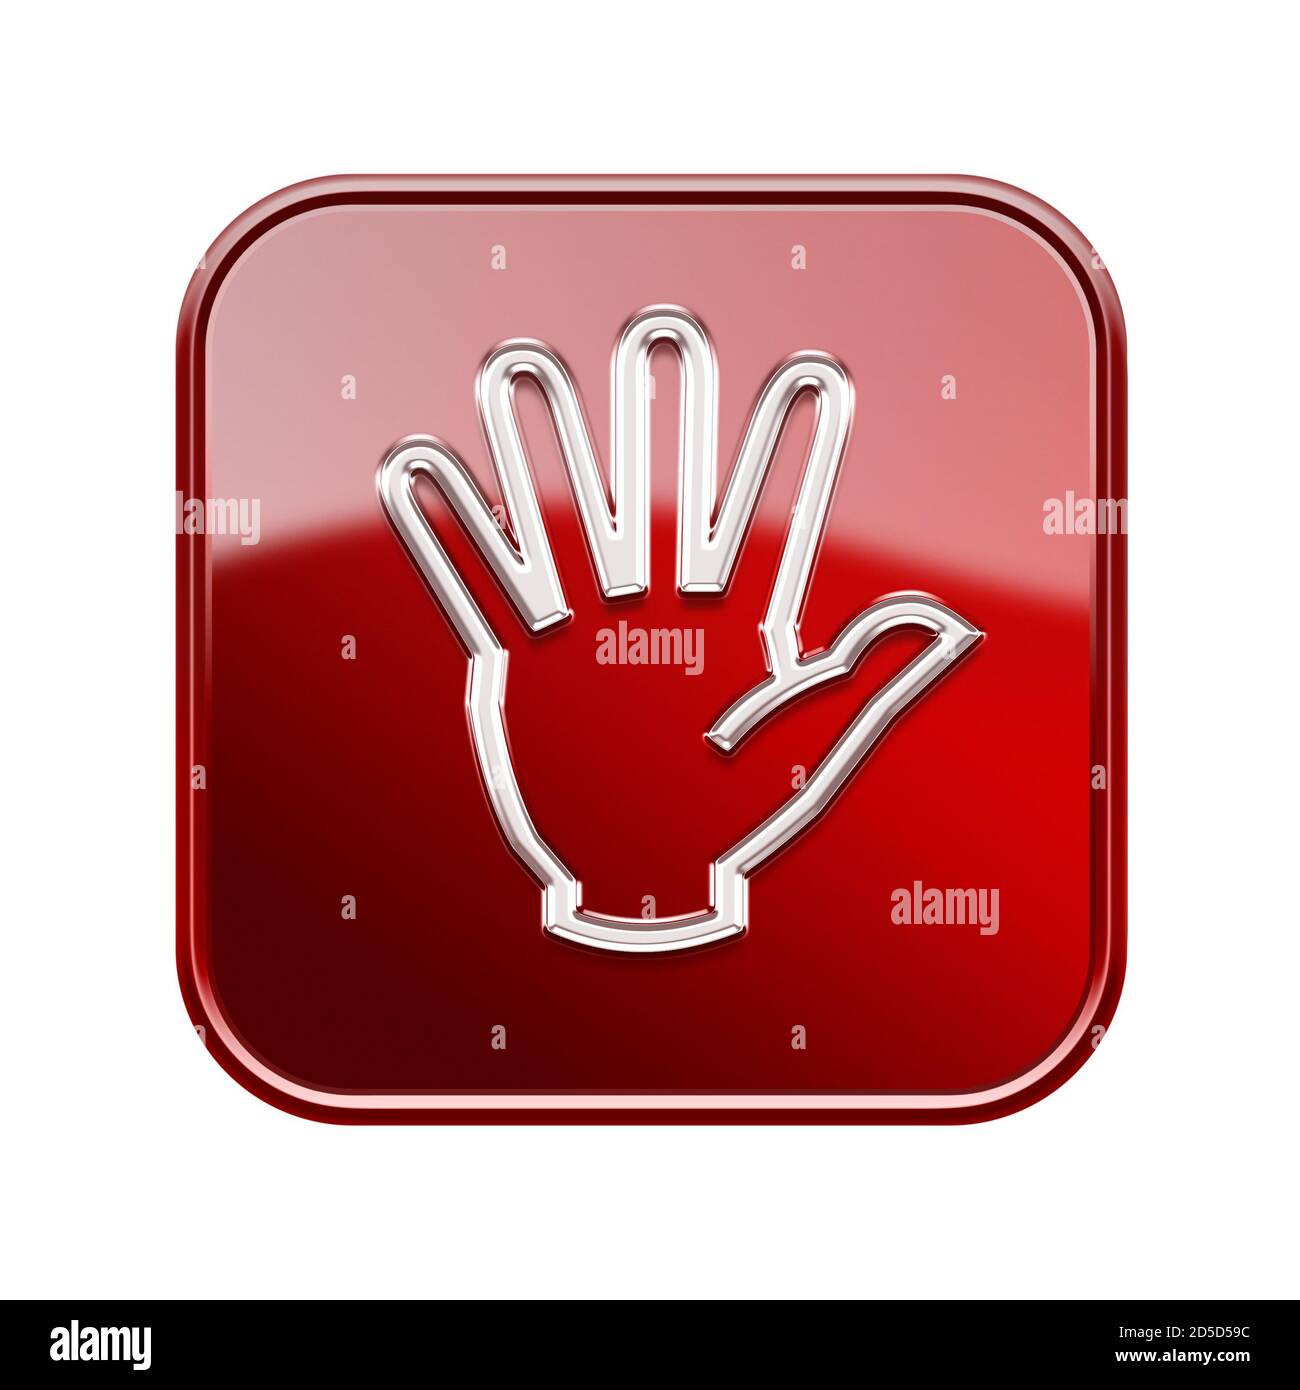 hand icon glossy red, isolated on white background Stock Photo